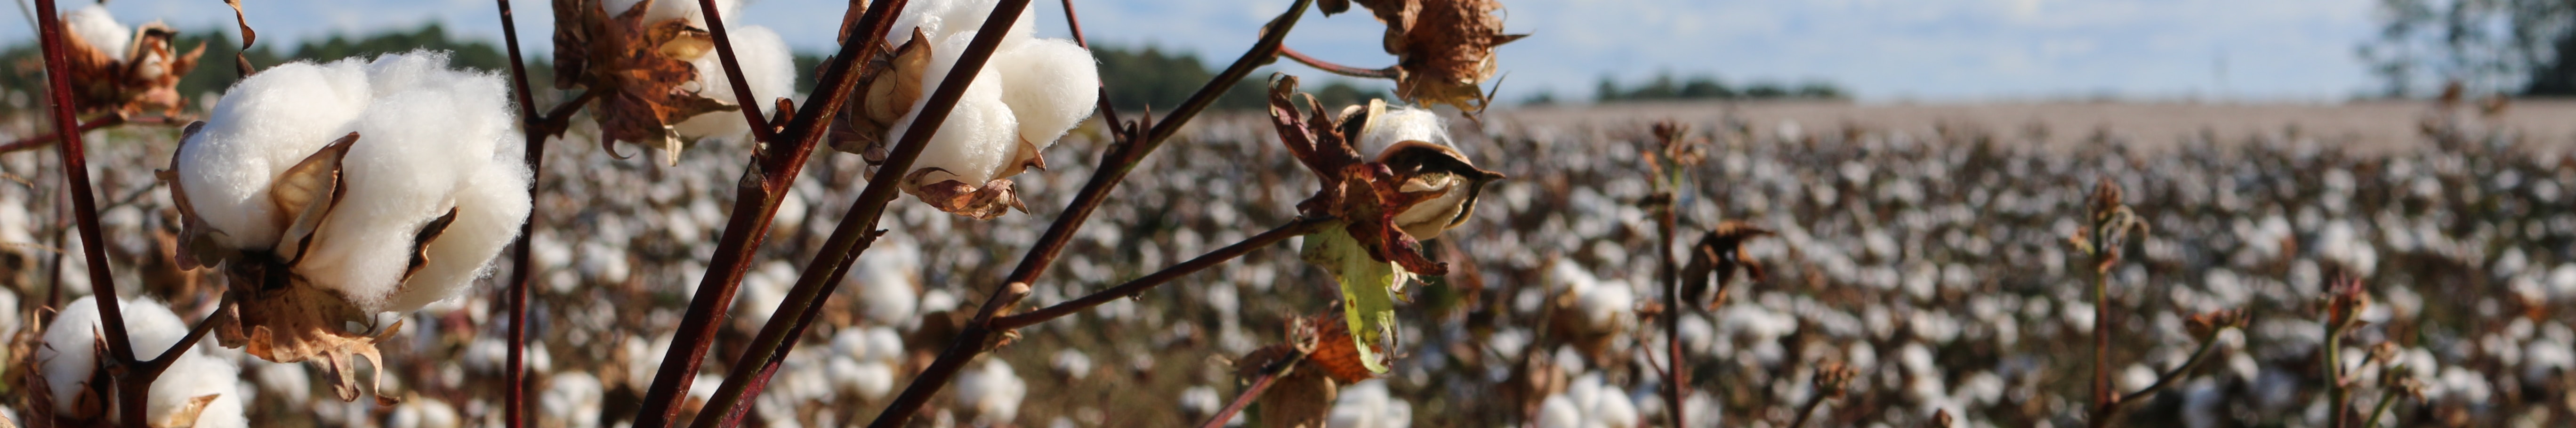 In 2022, Carter's Inc sourced 30,956 tonnes of cotton using an estimated 60,689 ha land area